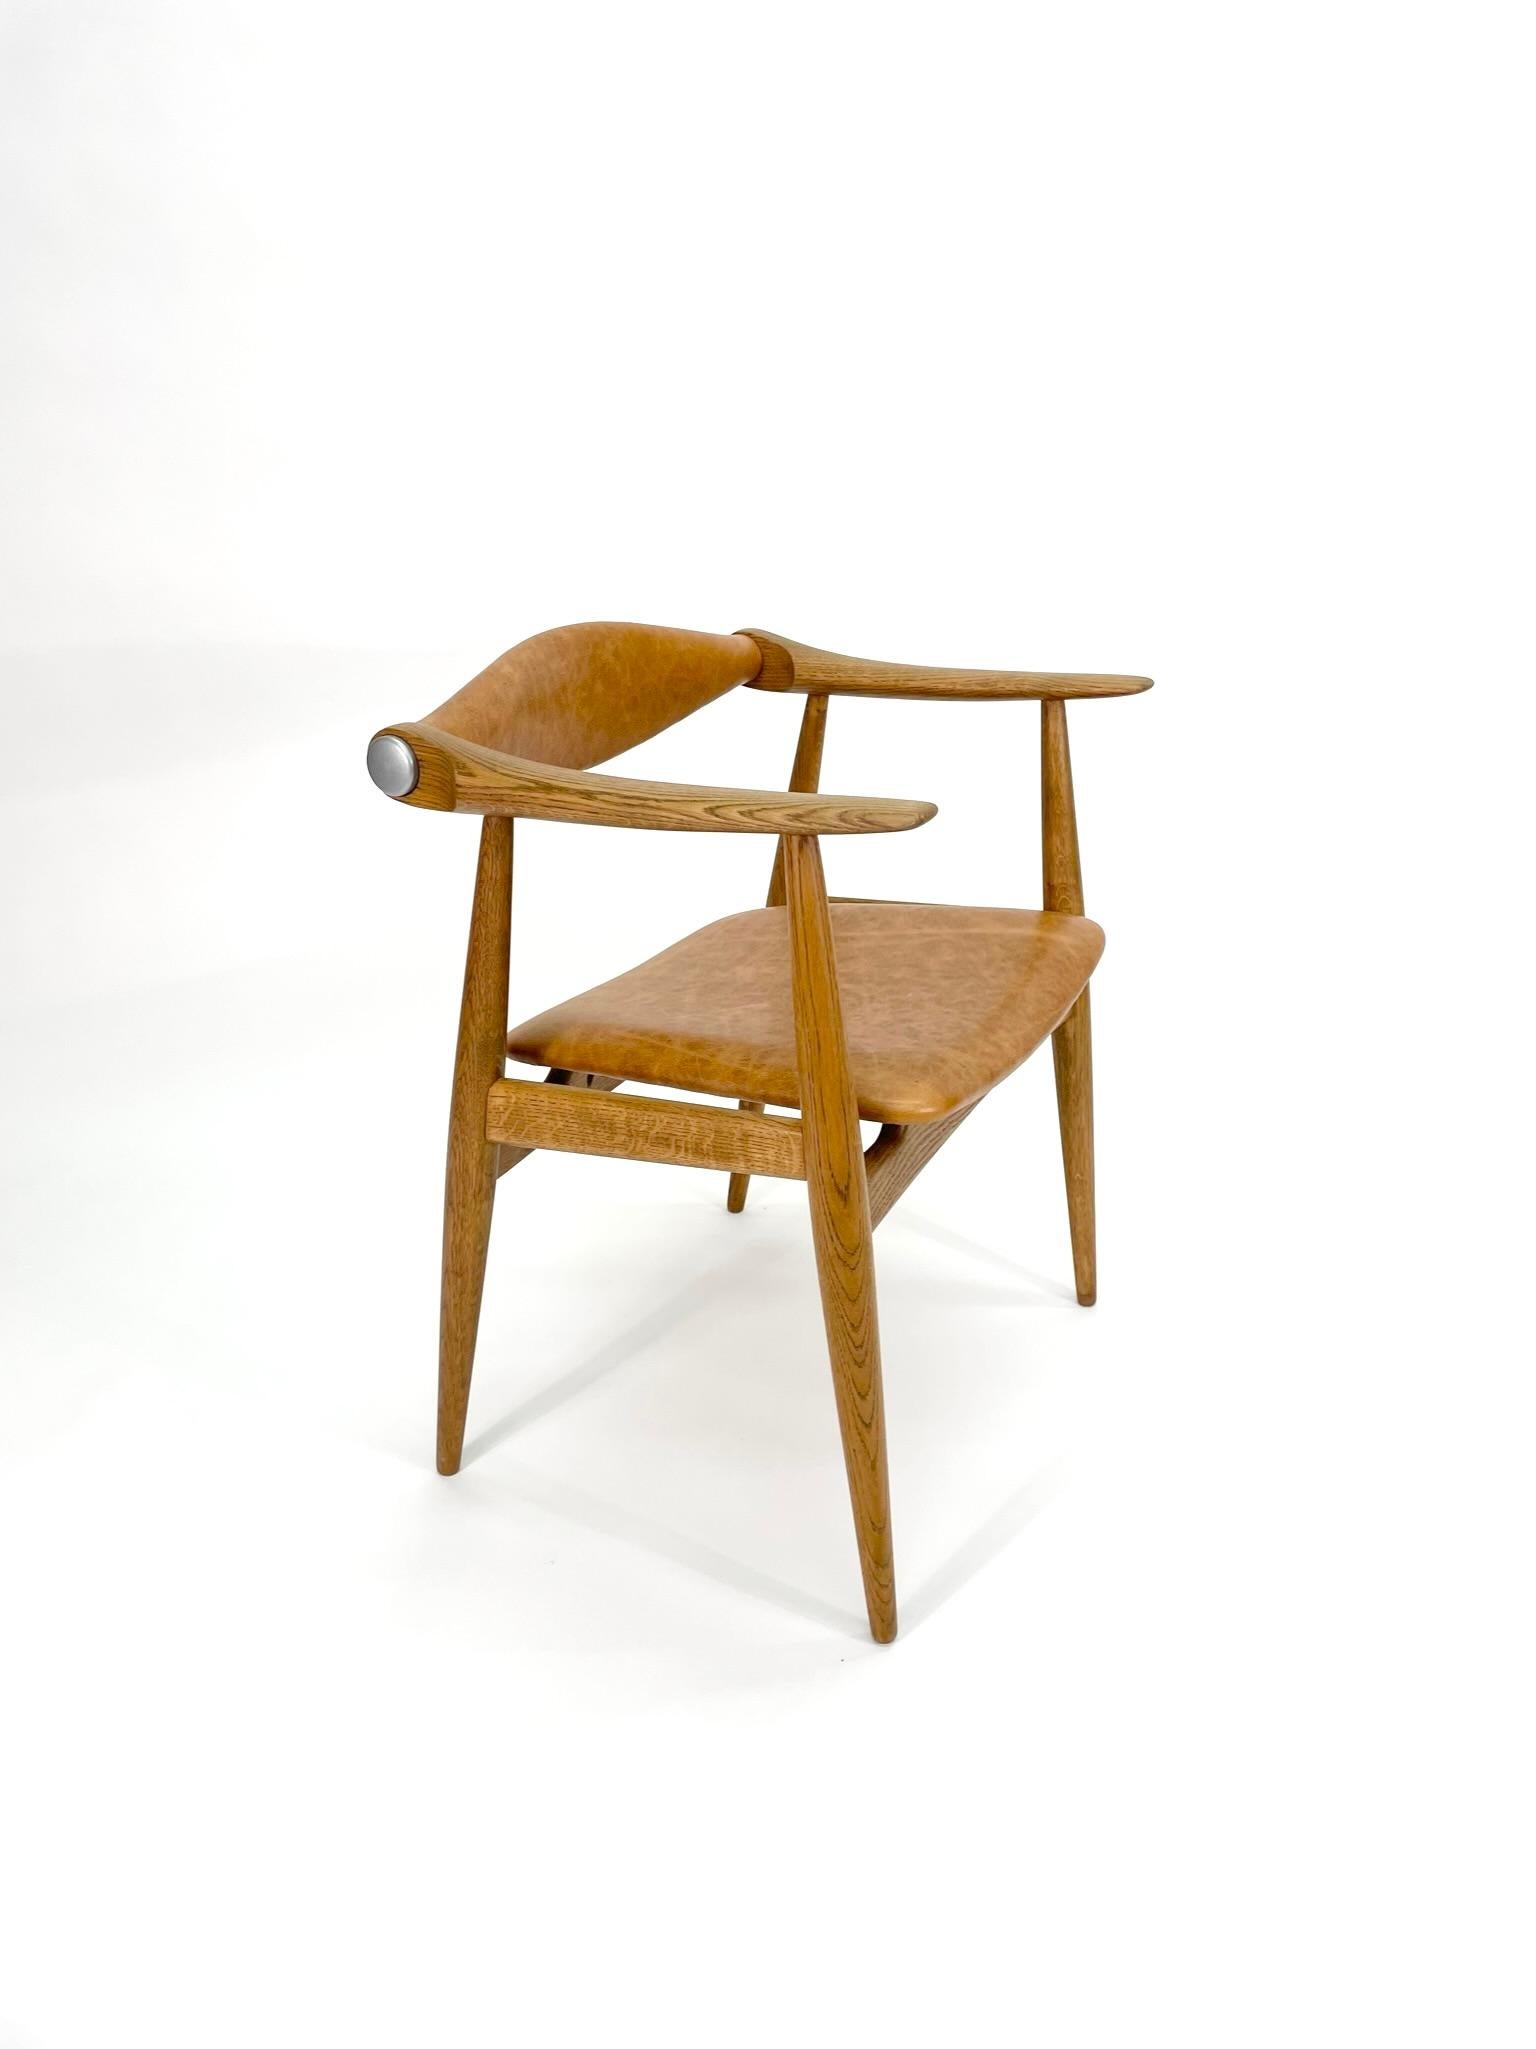 We are excited to present a set of  8 Hans J. Wegner 